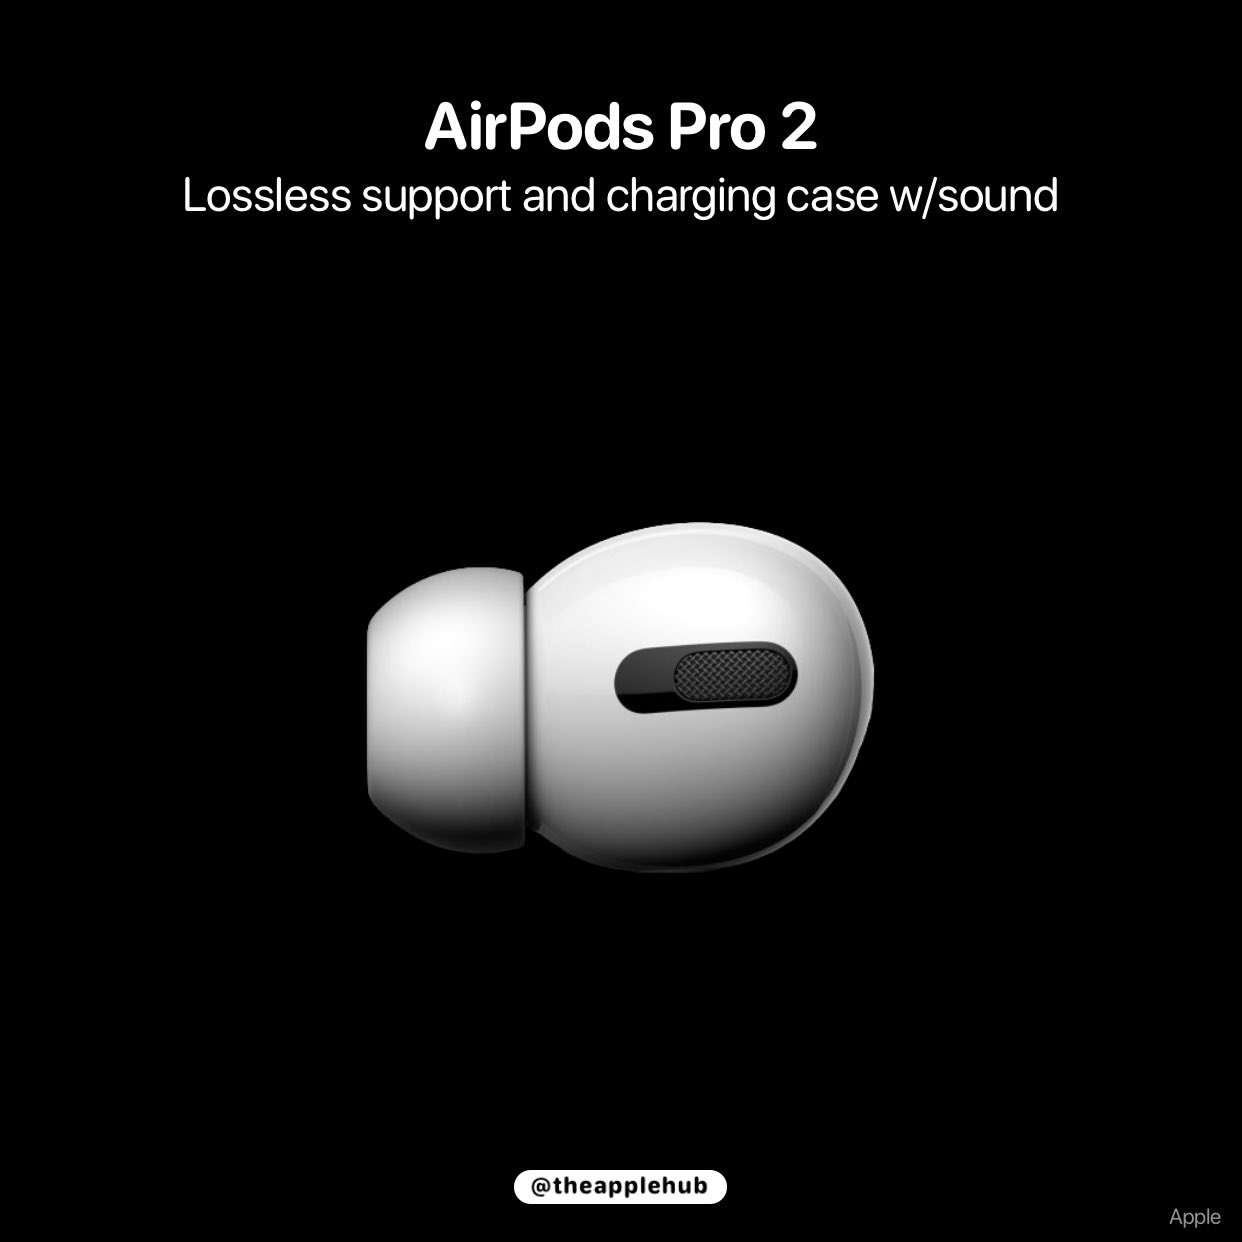 Apple Hub on Twitter: "According to analyst Ming-Chi Kuo, the upcoming  second-generation AirPods Pro will feature Lossless audio support and a new  charging case that can emit a sound when lost. Kuo